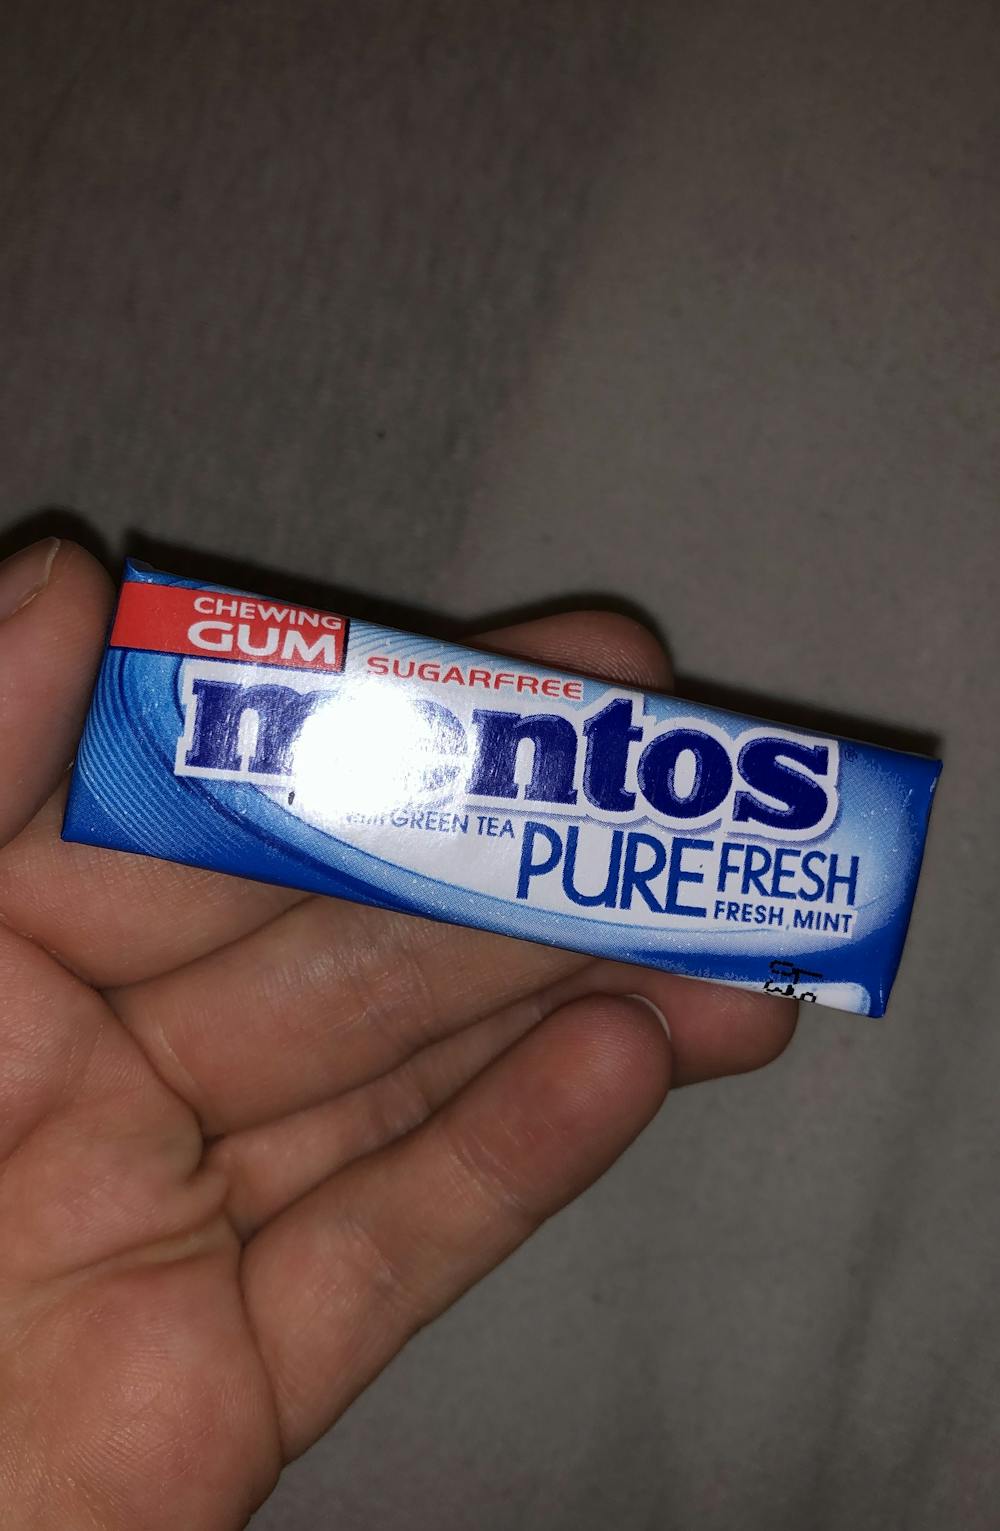 Chewing gum pure fresh mint, Mentos